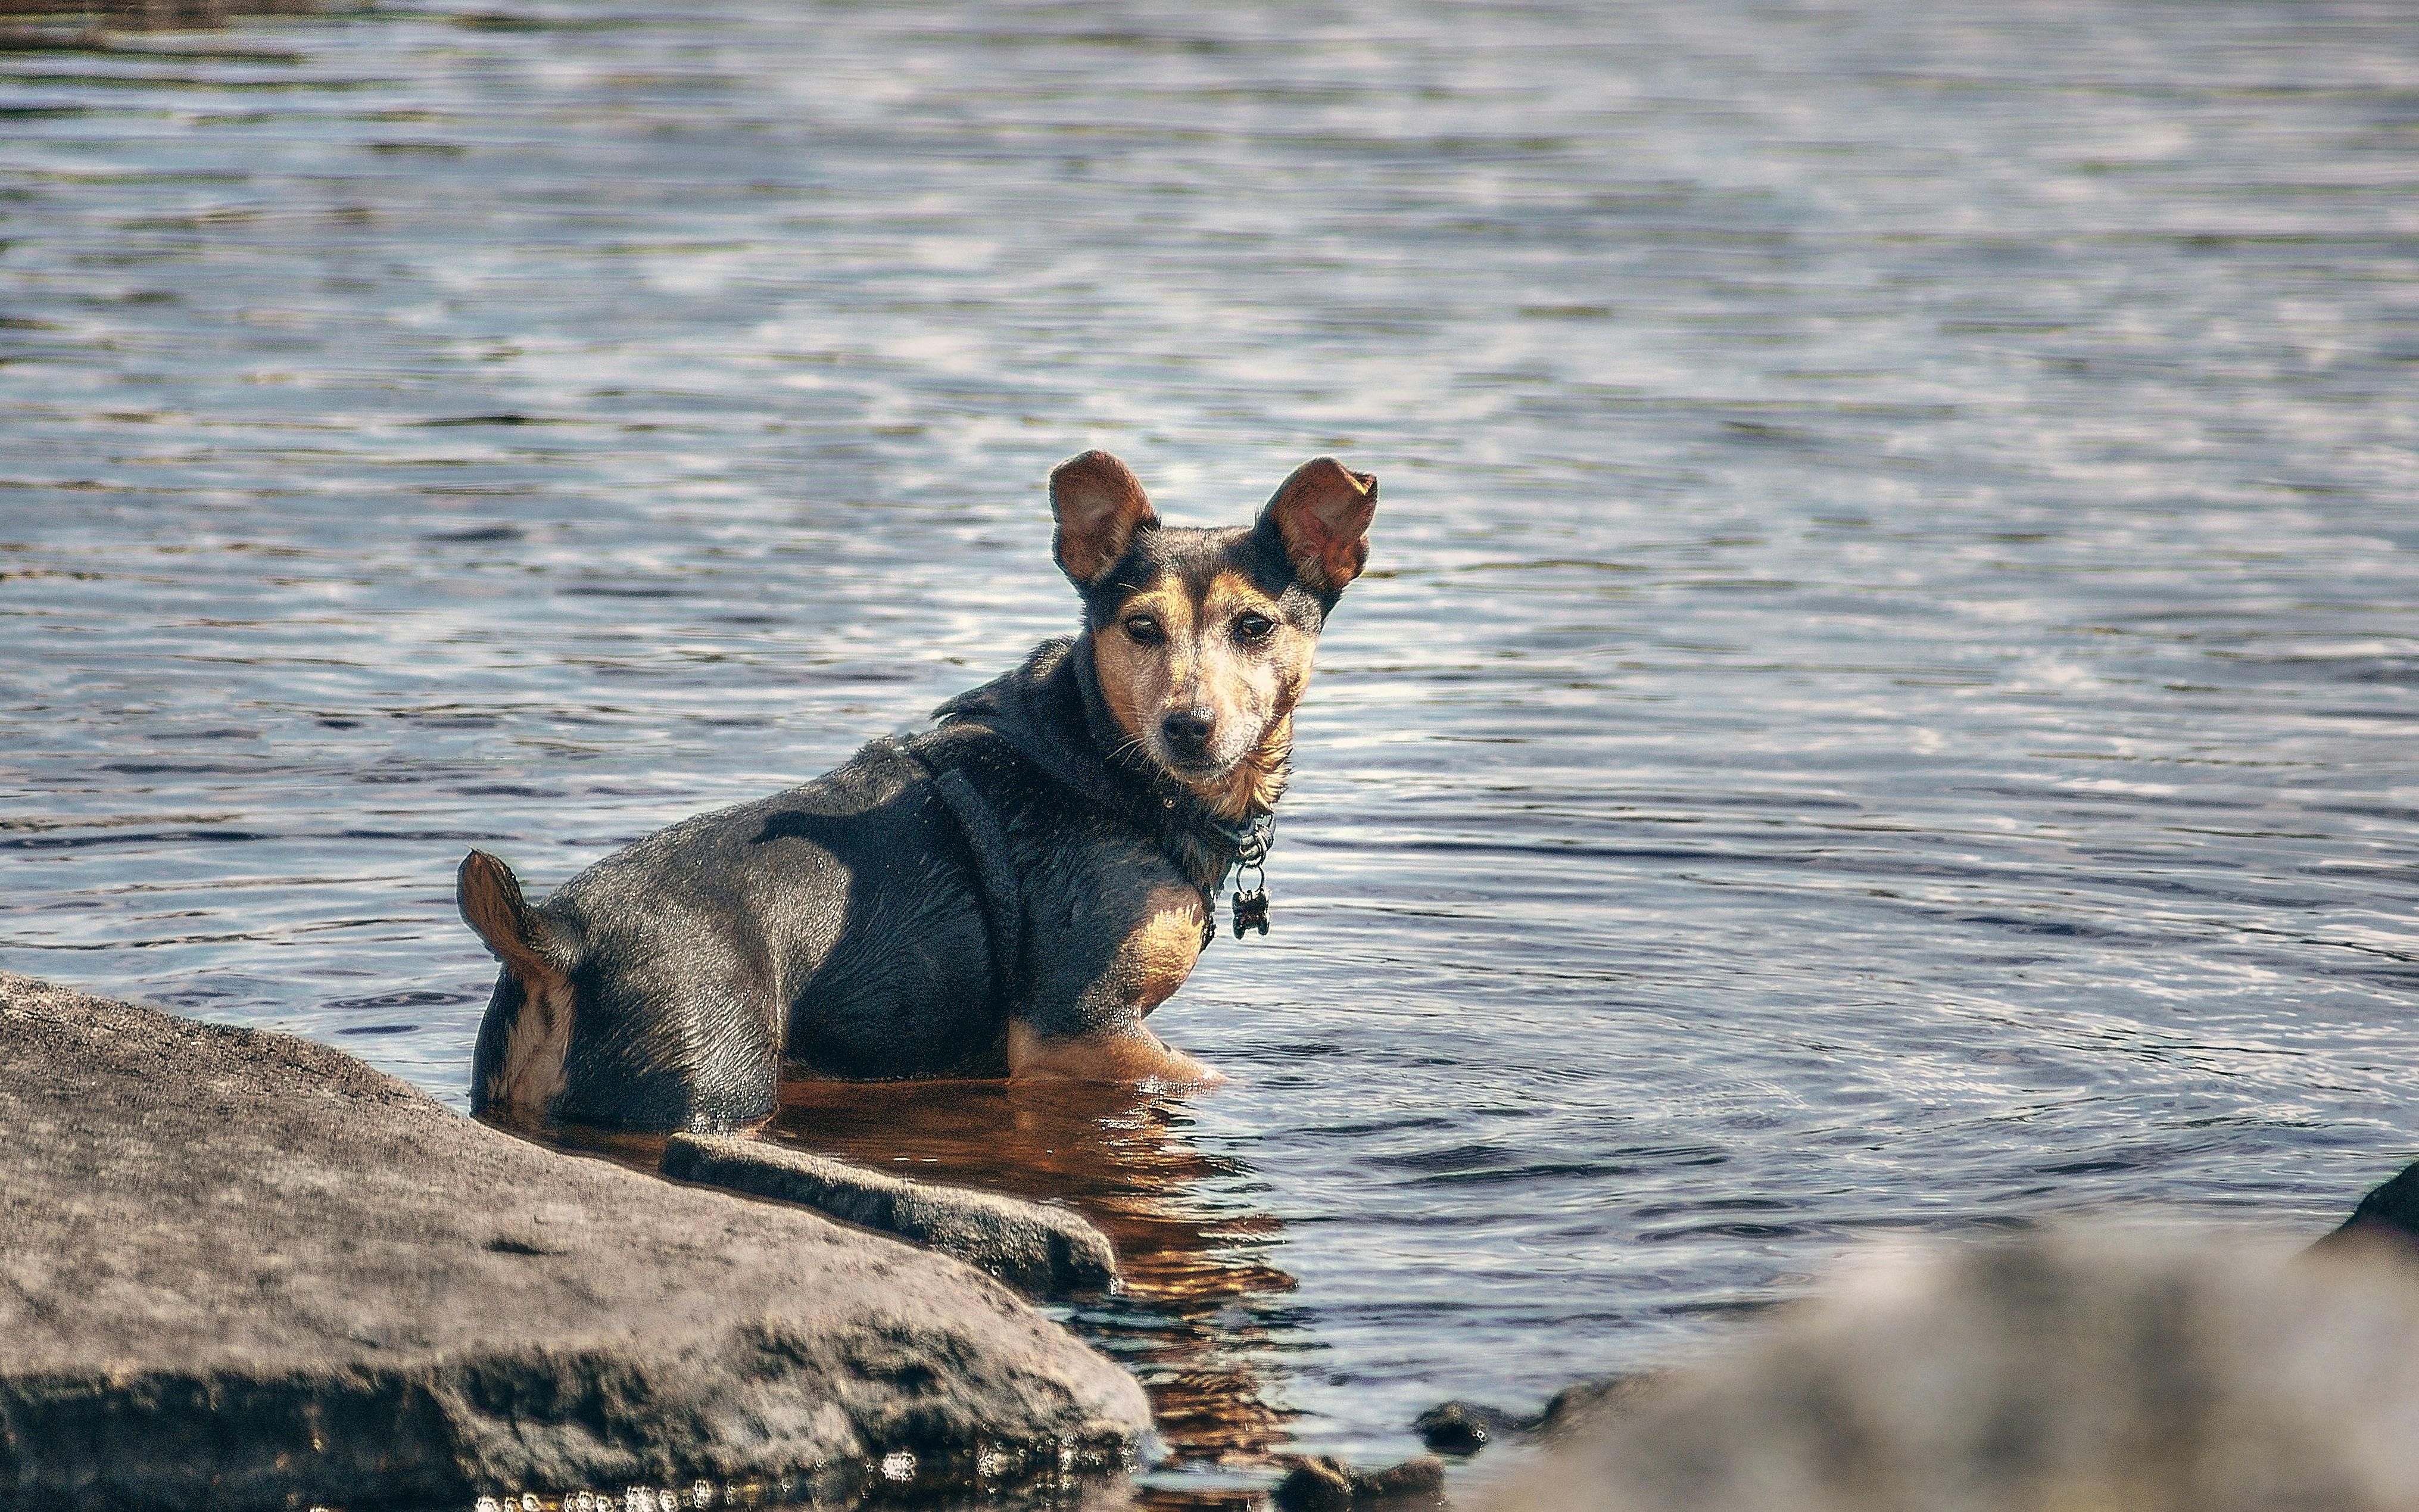 The Heidi Monster takes a refreshing dip in Lough Doo atop Fair Head after an long afternoon hike on a very warm spring day (Jun., 2020).